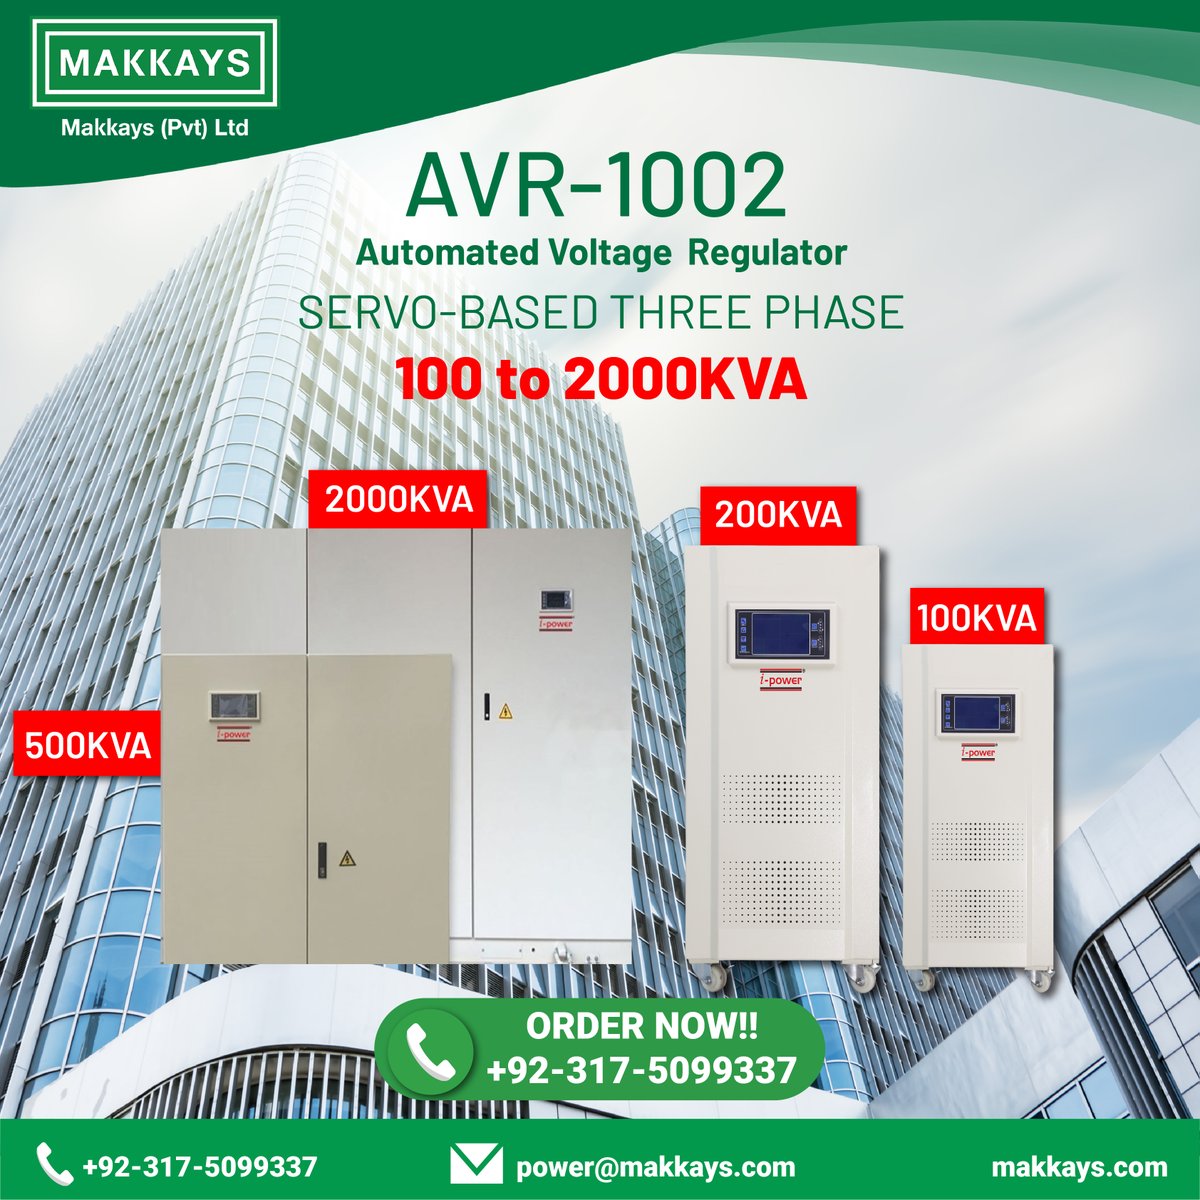 The i-power “Servo Voltage #Stabilizers” provide protection against main #power sags, surges and brownouts.
#electricalequipment #powersupplies #technicalservices #powersolutions #electricservices #mechanicalservices #equipment #makkays #energysolutions #AVR #UPS #BATTERIES